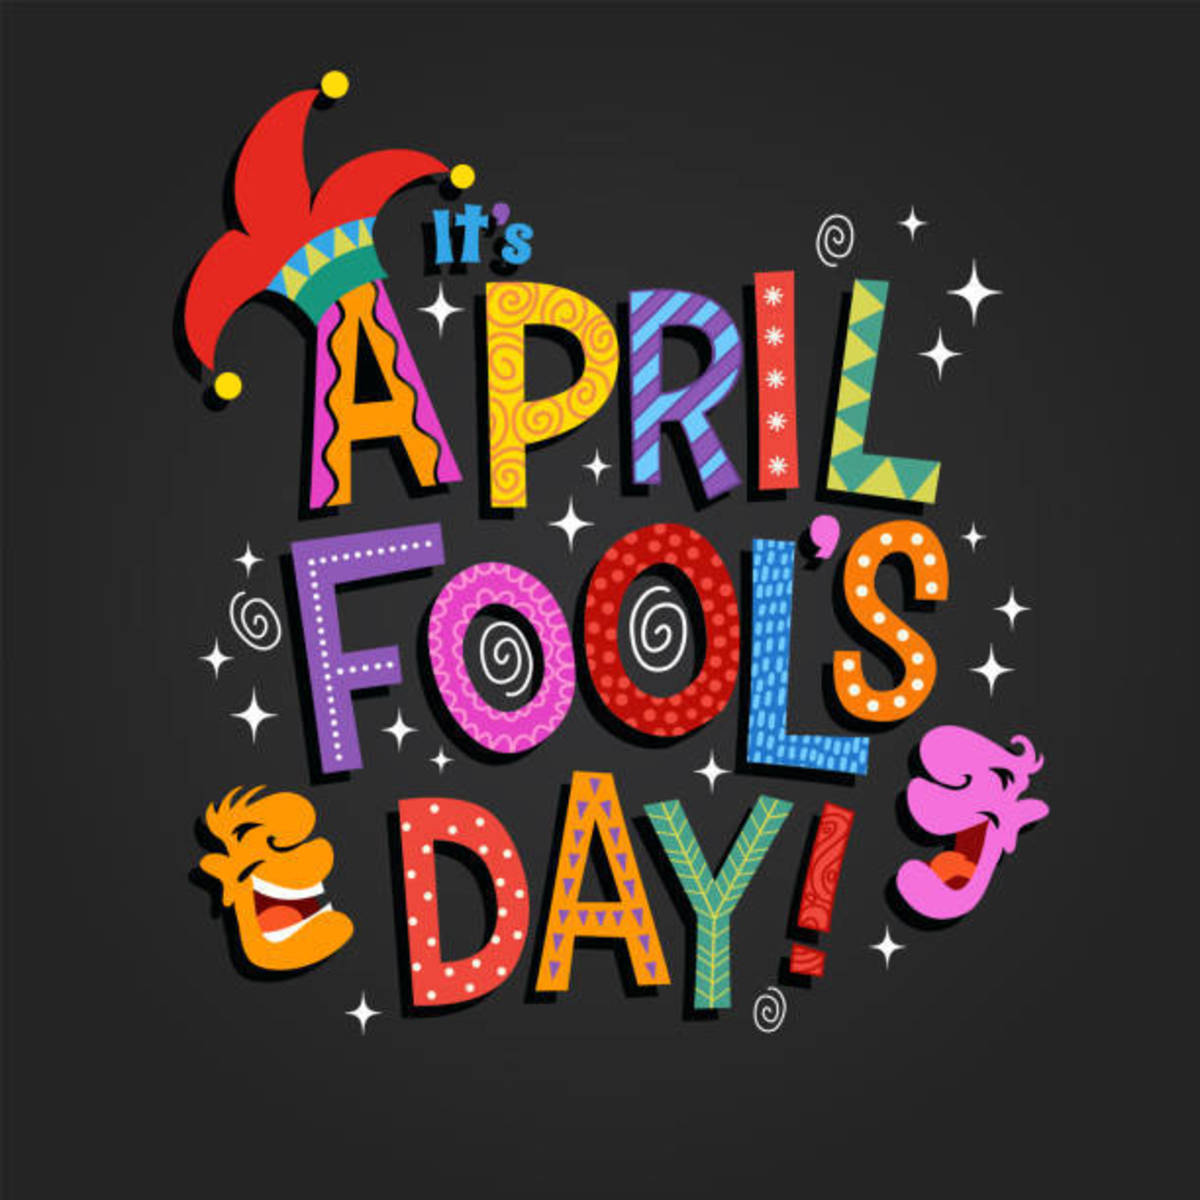 5 April Fool Hoaxes That Trended on the Internet